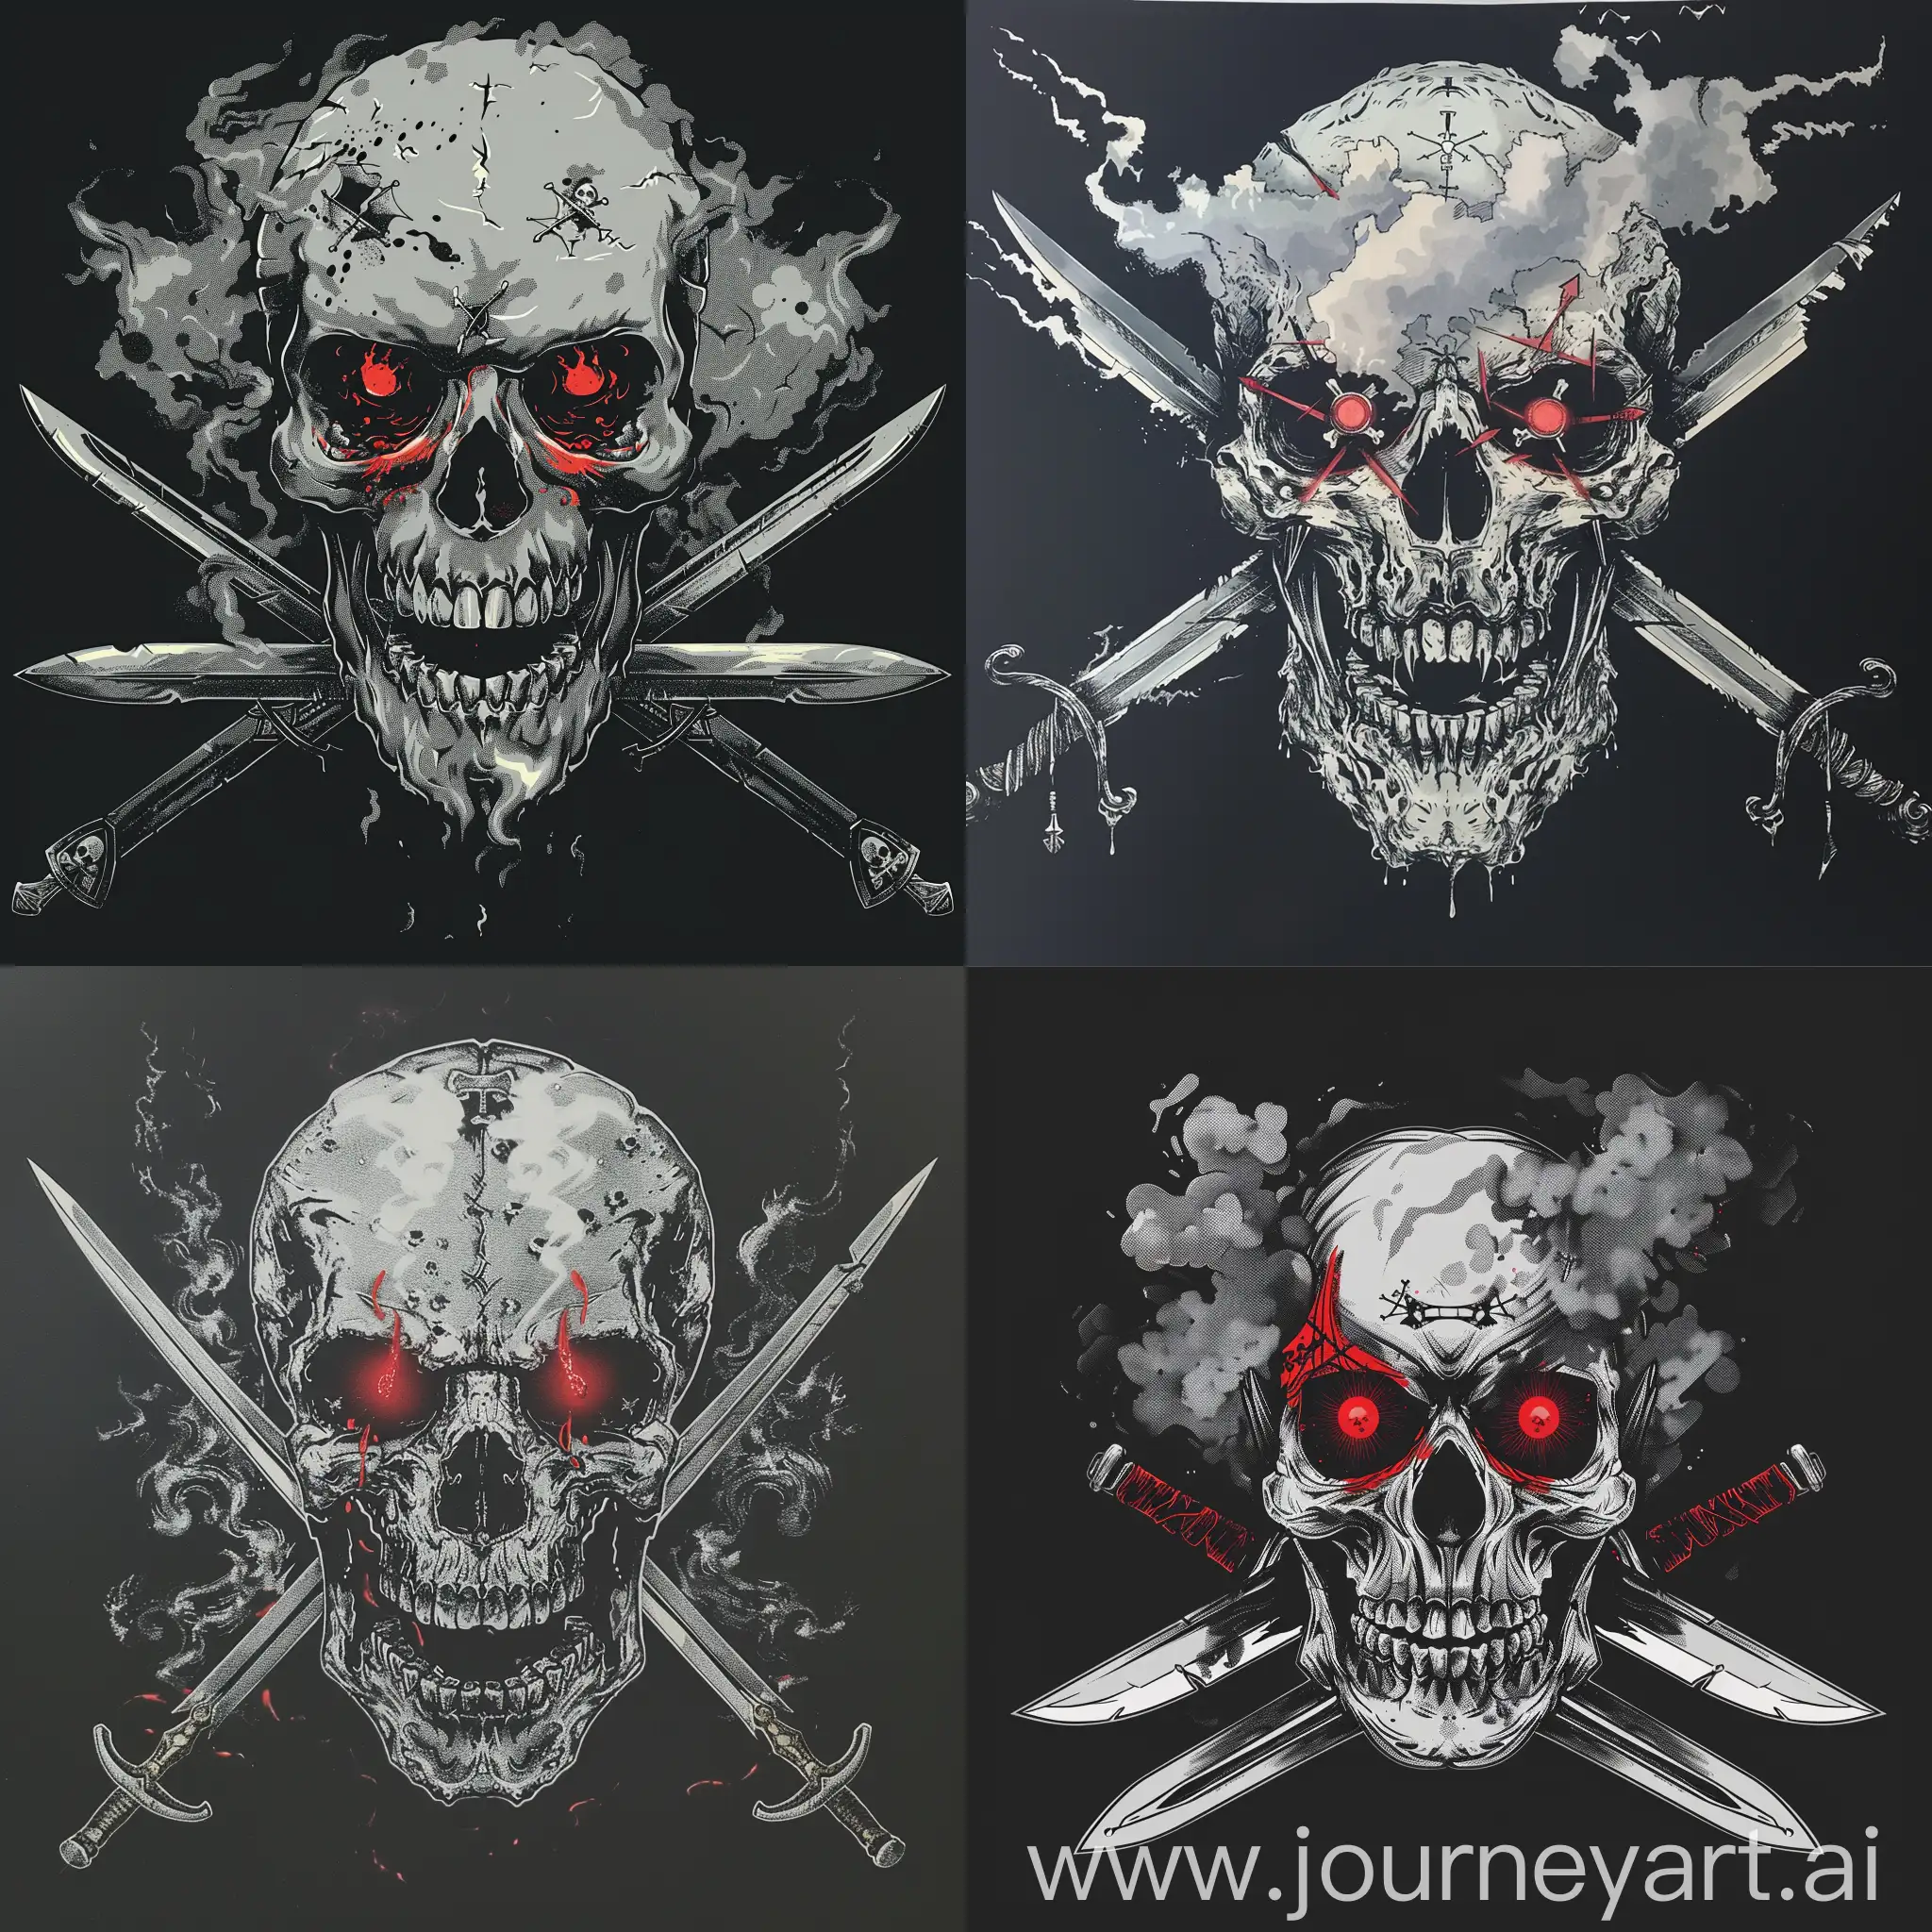 Eerie-Skull-with-Red-Eyes-and-Smoking-Swords-on-Black-Background